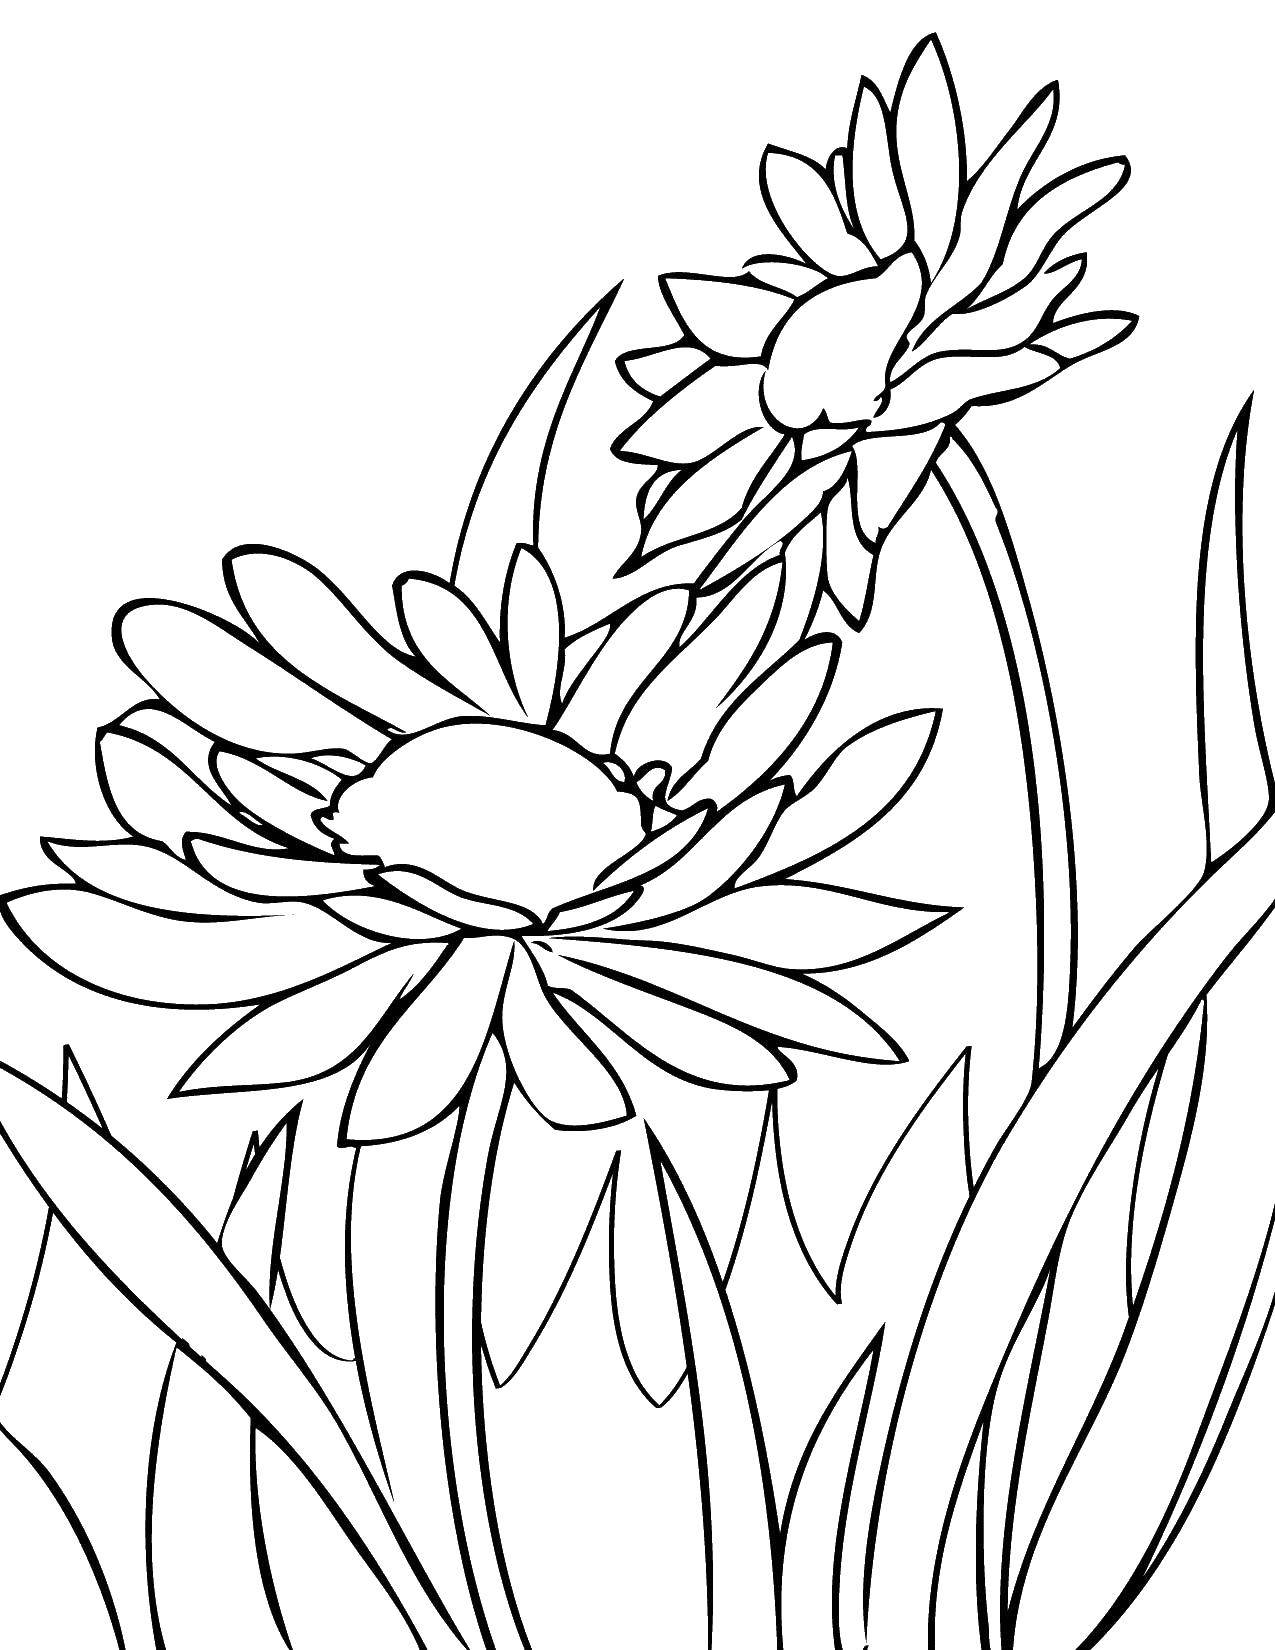 Coloring Spring flowers. Category Spring. Tags:  flowers.